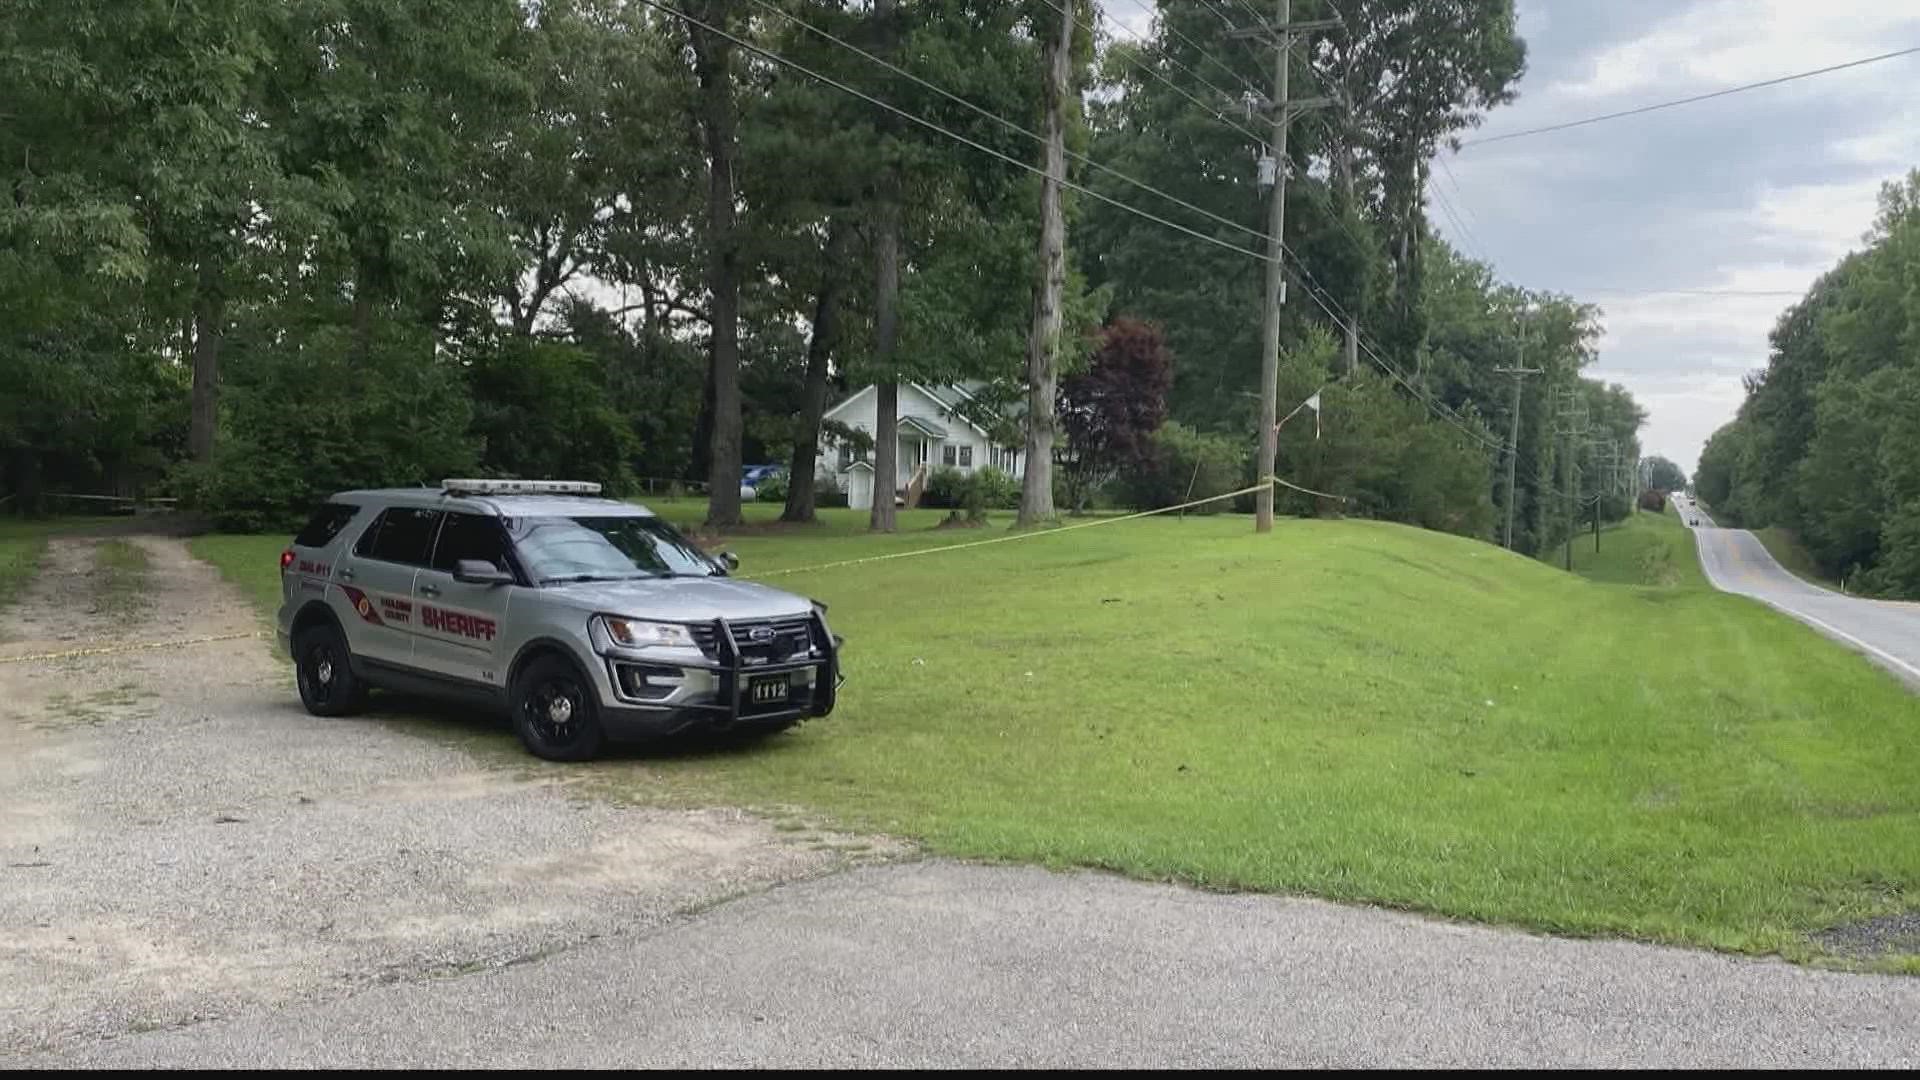 A man called 911 on Wednesday in reference to an "unknown problem," according to the Paulding County Sheriff's Office.